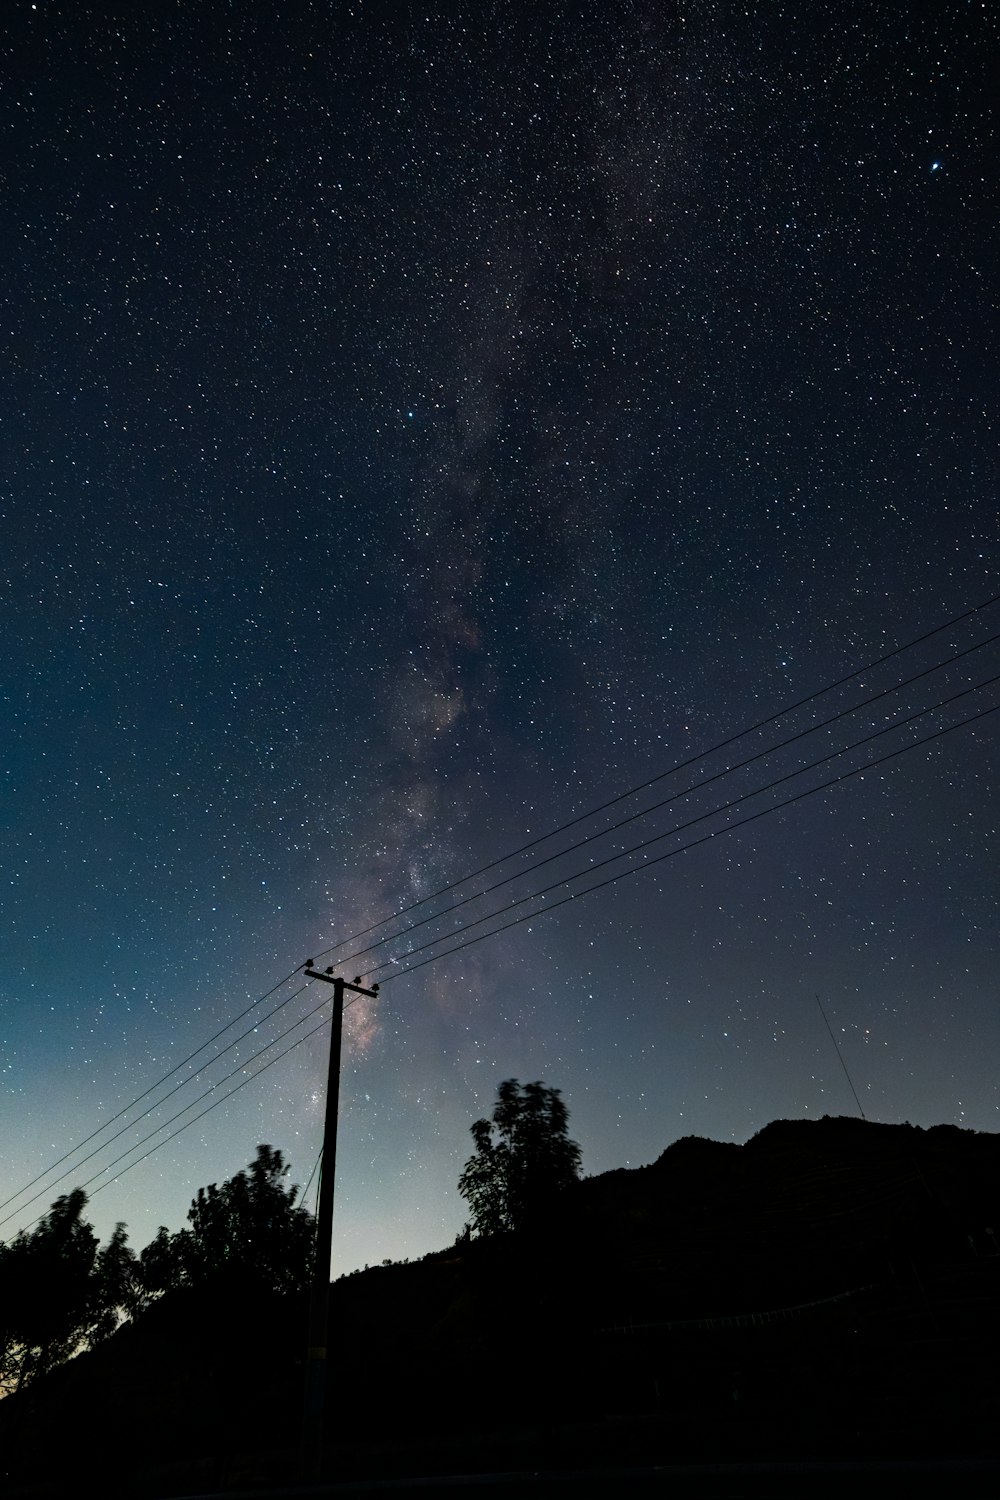 the night sky with stars and a telephone pole in the foreground